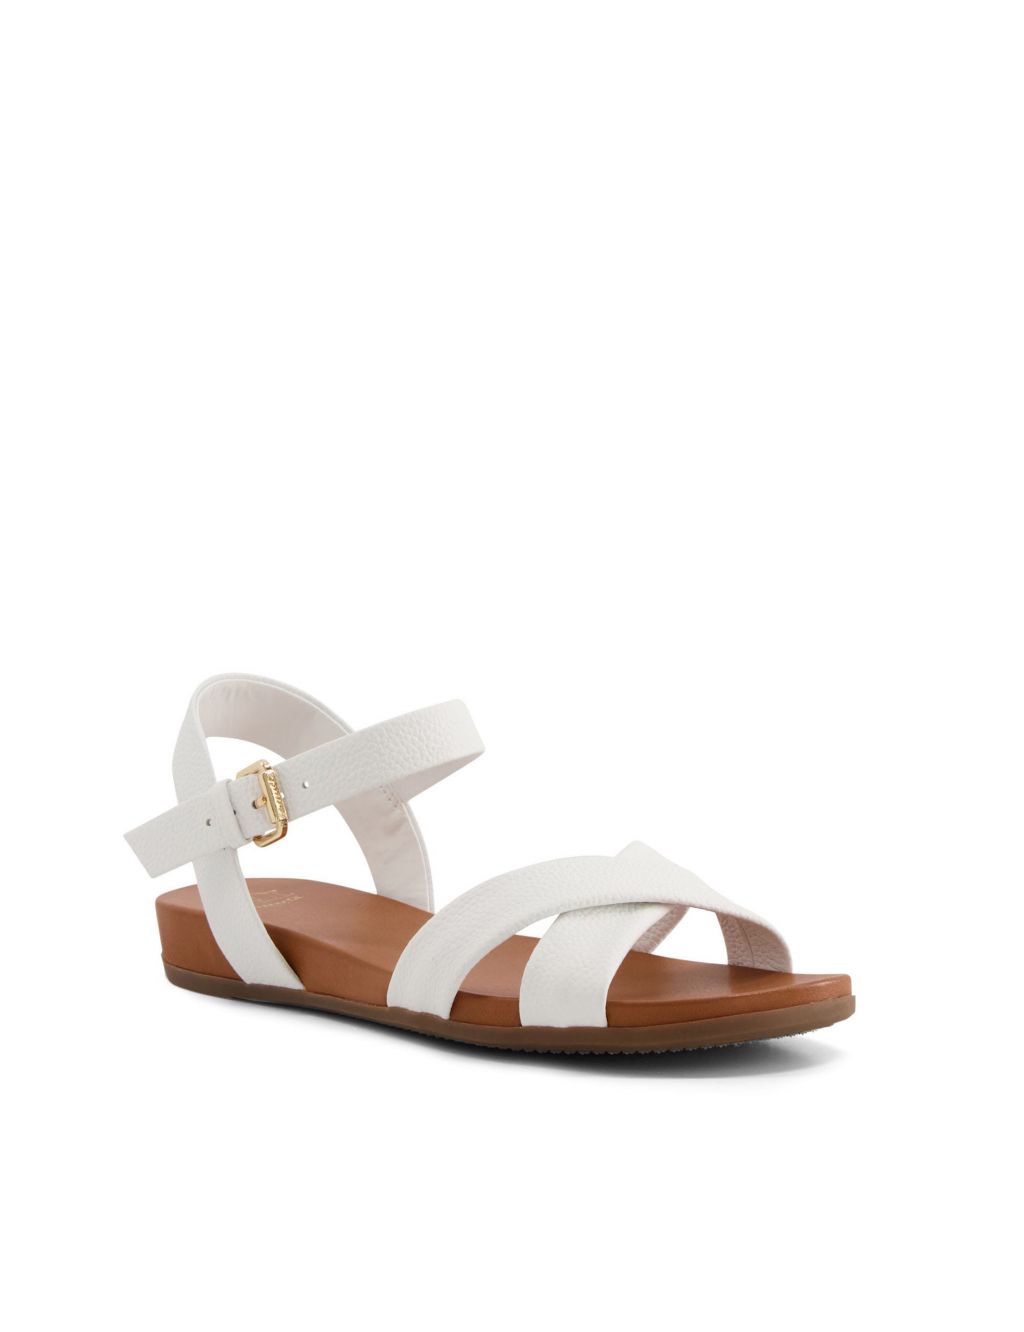 Leather Ankle Strap Wedge Sandals image 3